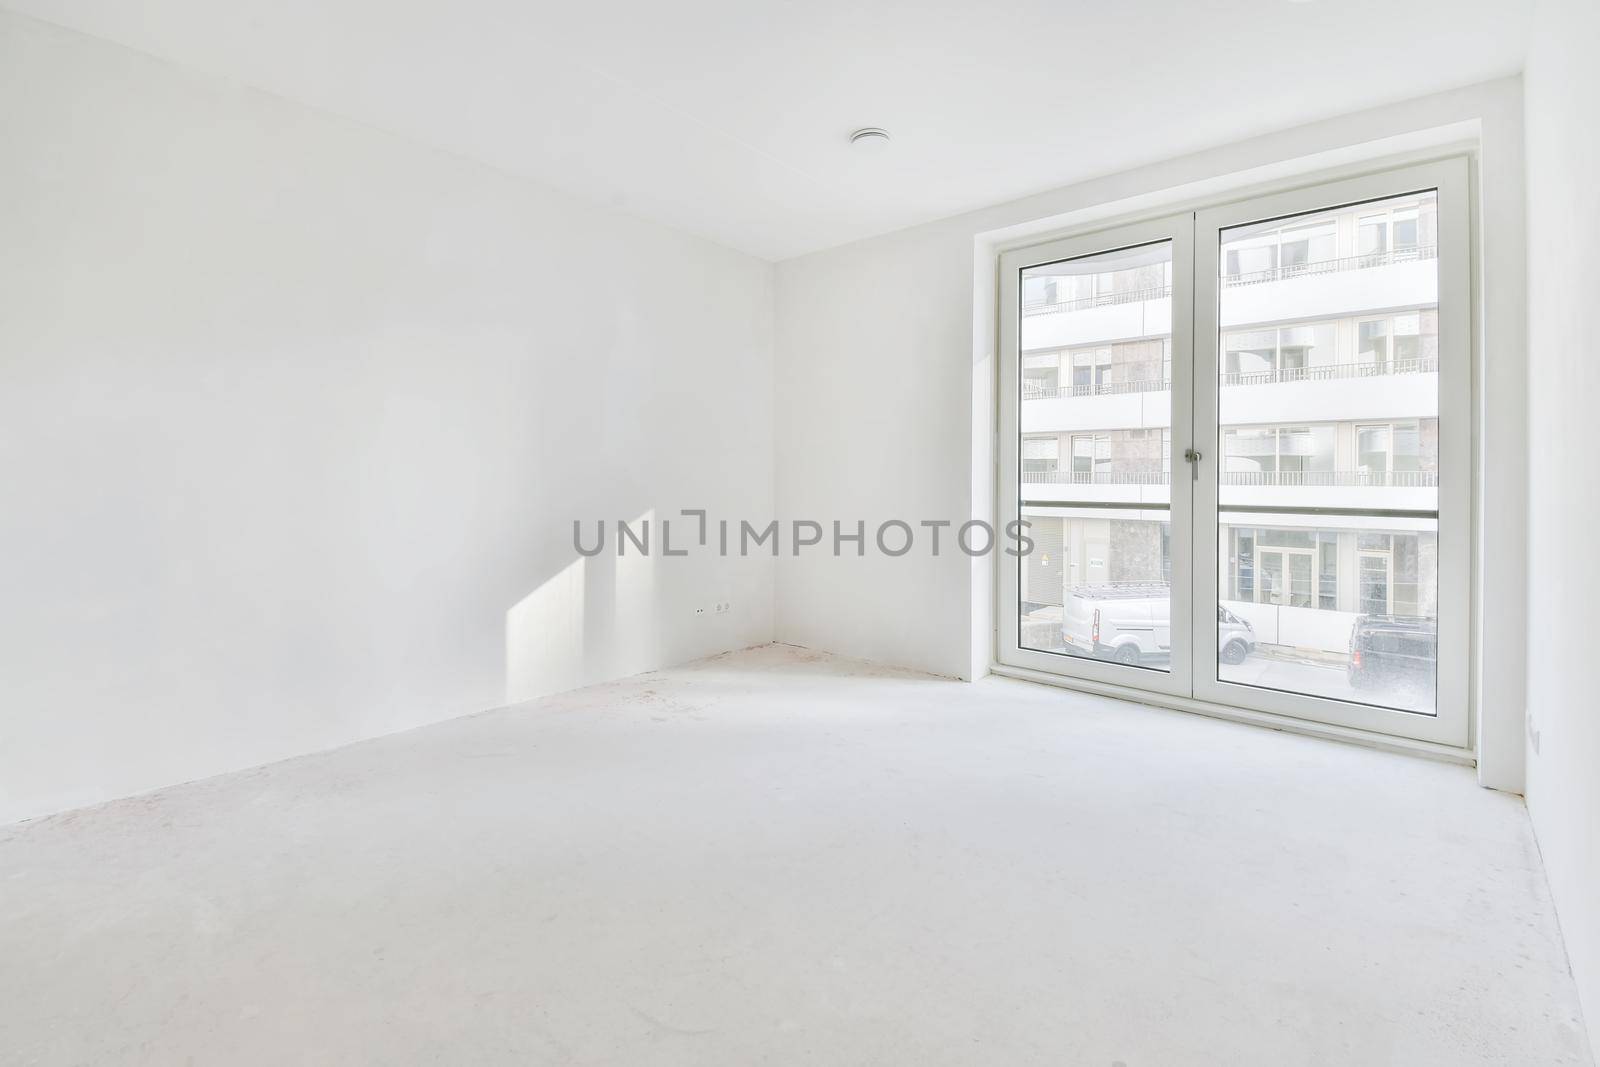 A completely white room in an elegant apartment